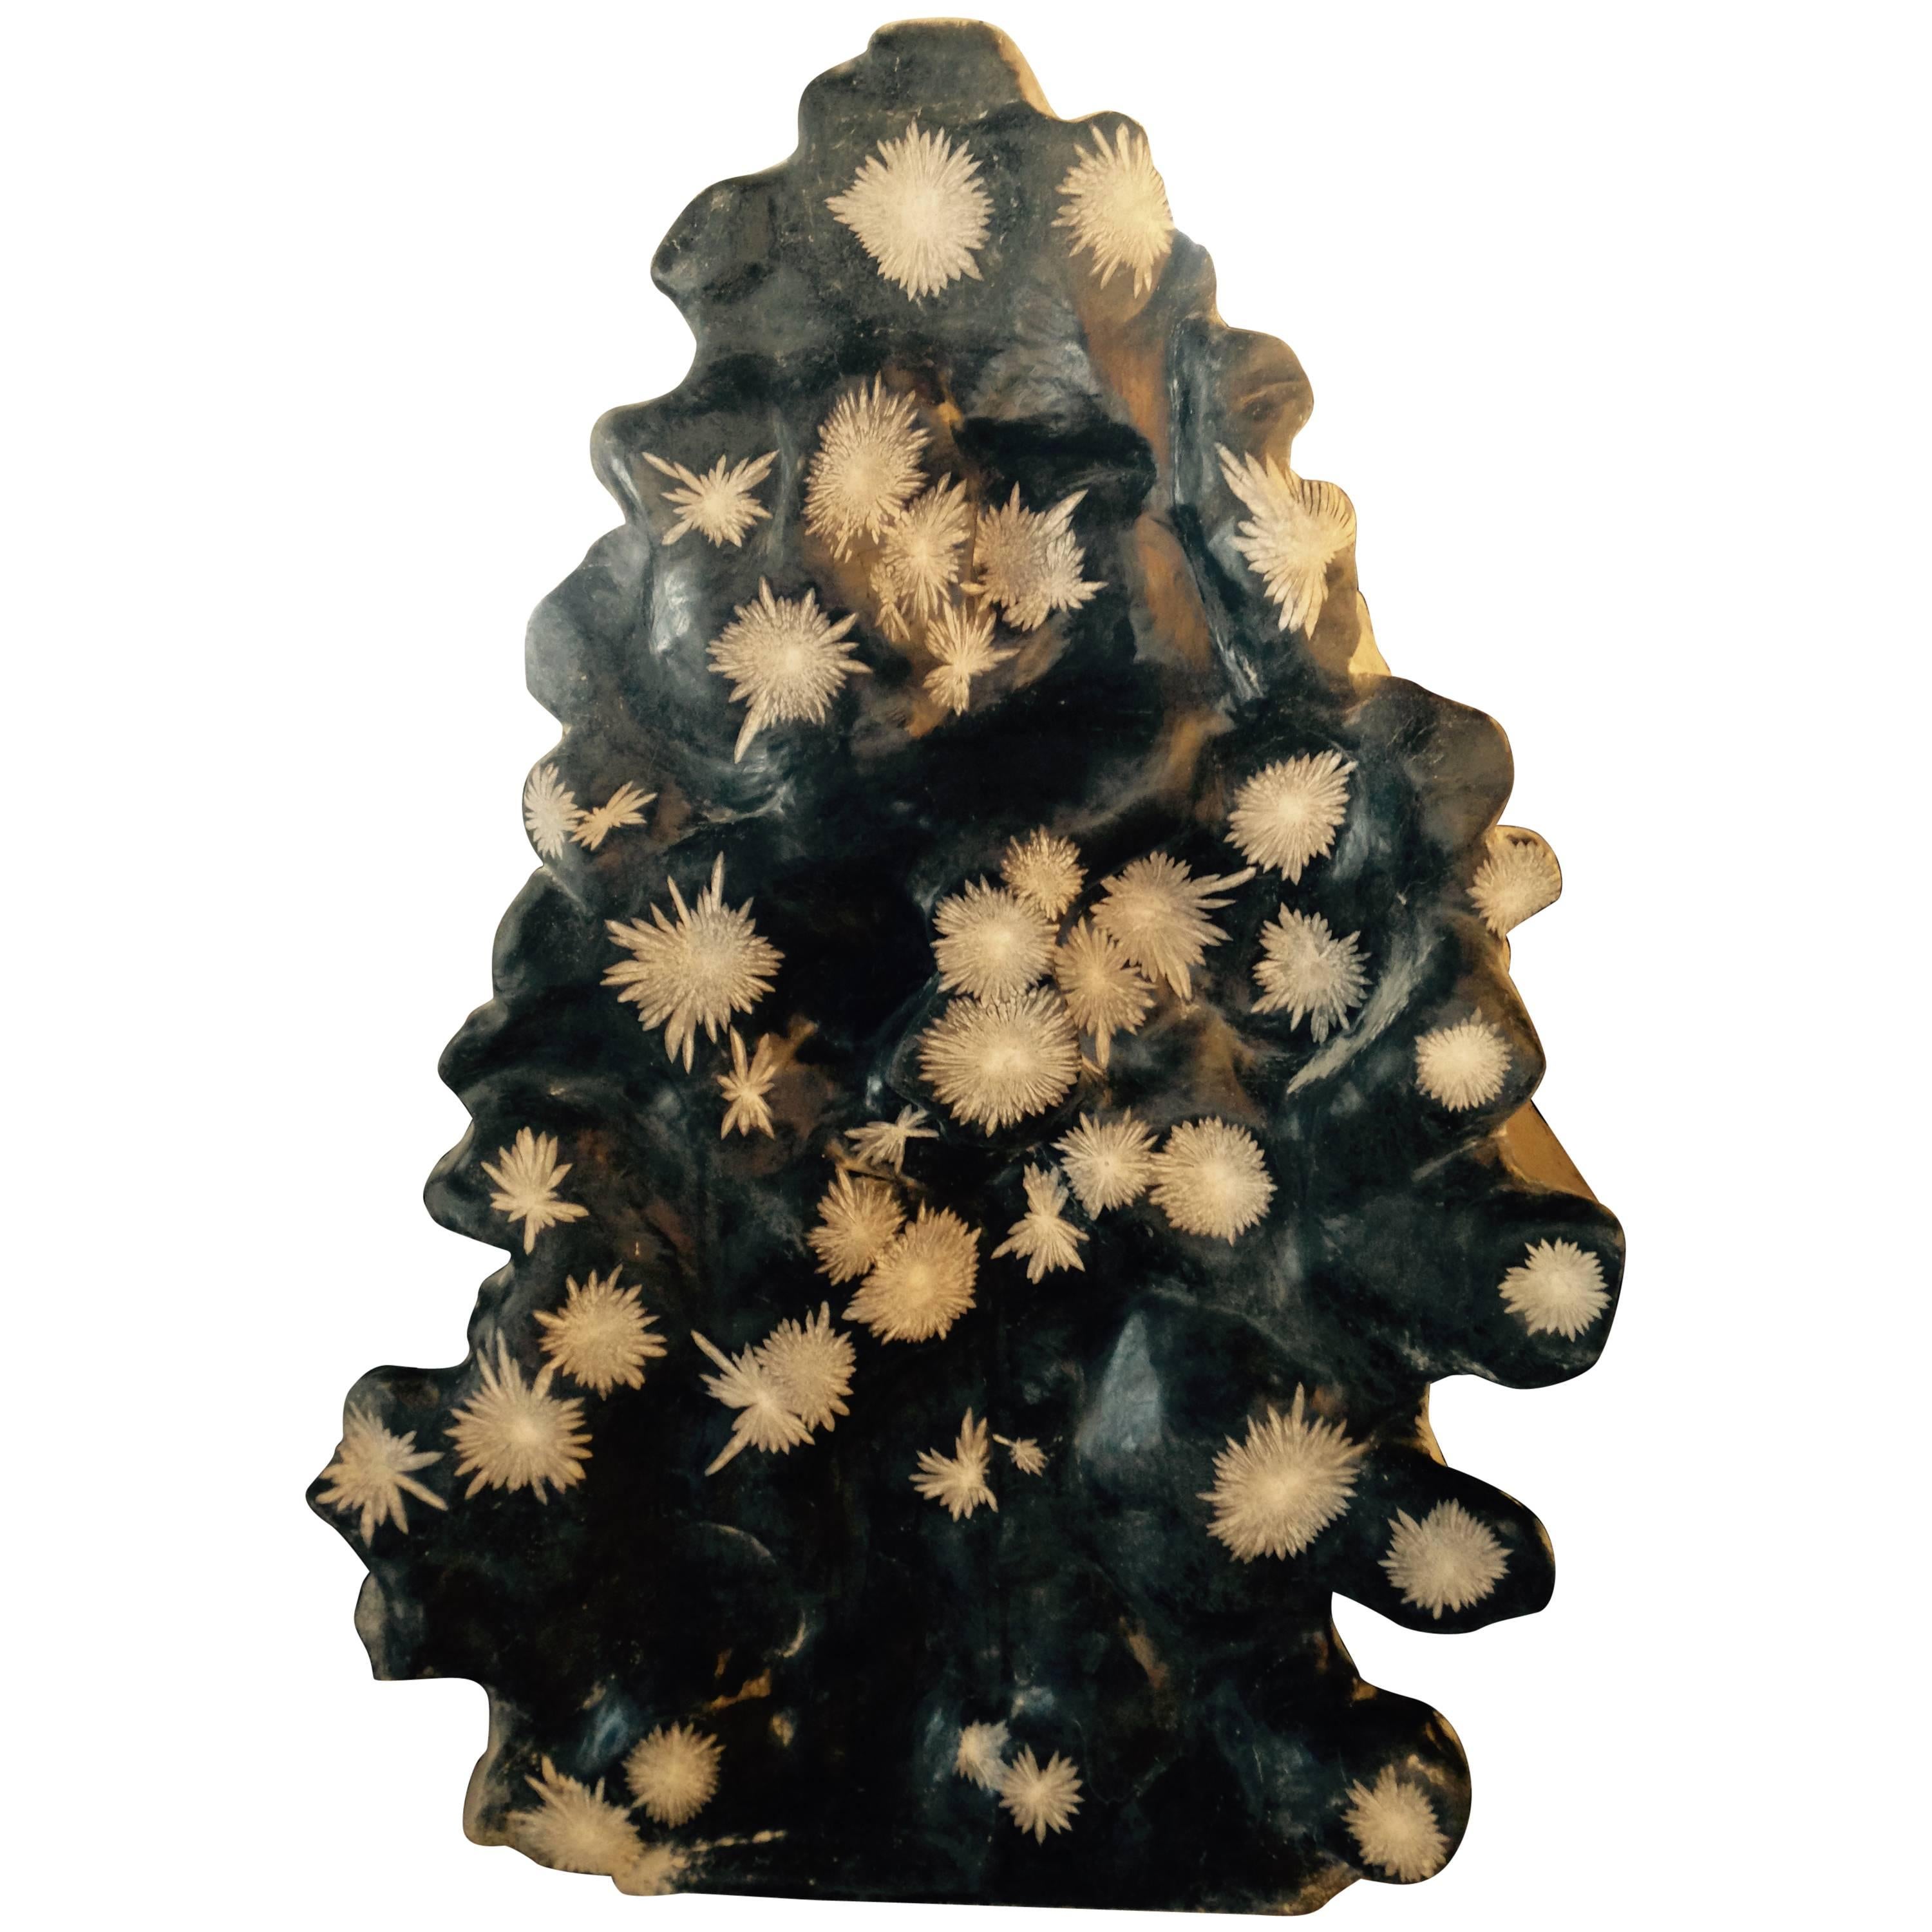 Magnificent Tall Starry Nights Natural Chrysanthemum Stone Sculpture, 63" High  